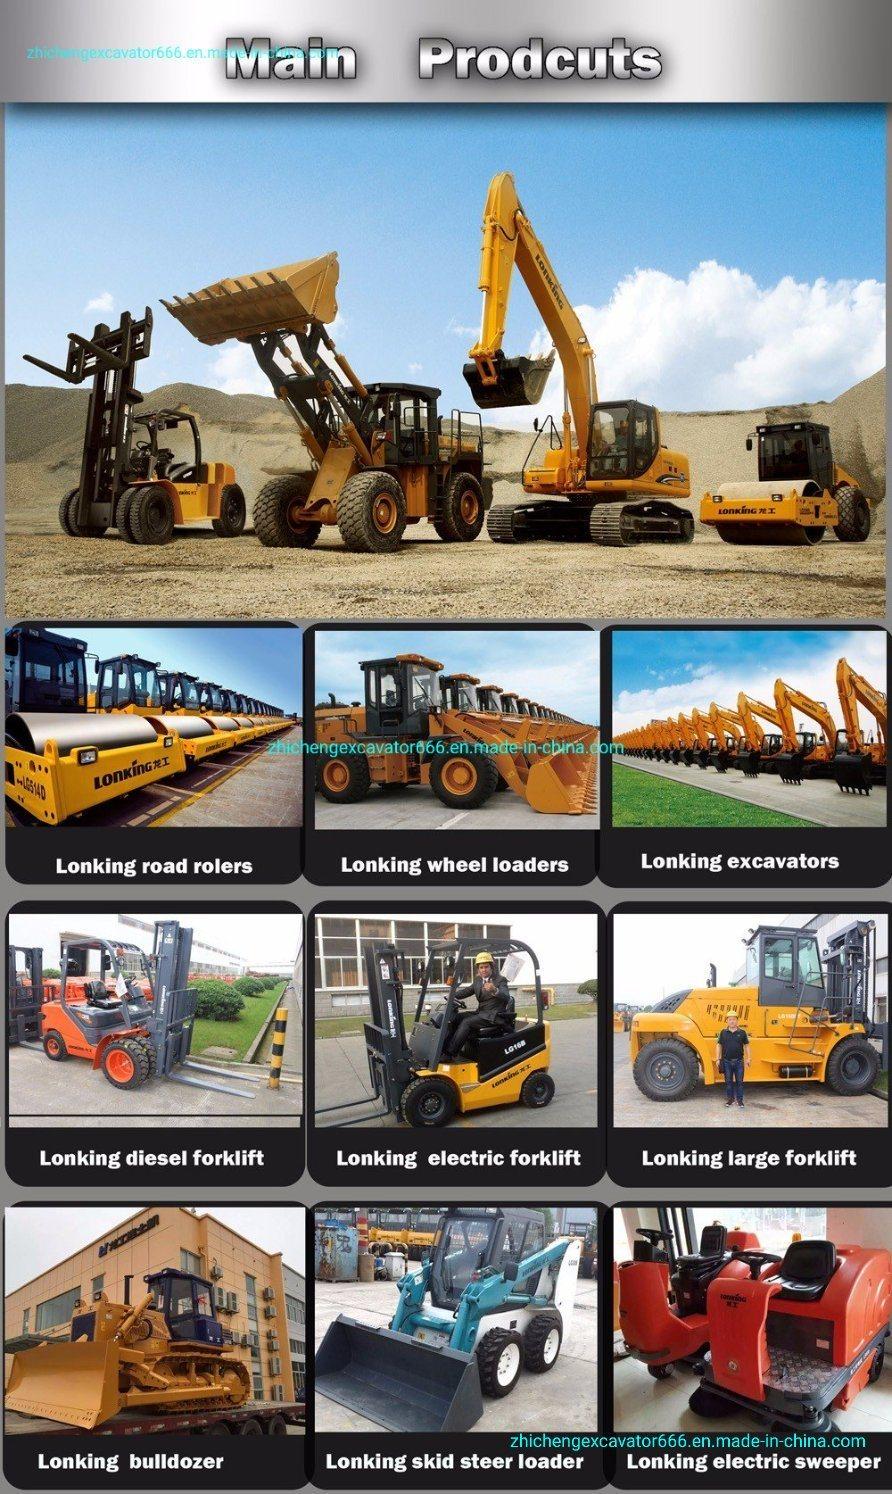 15 Ton Wheel Tire Used Second Hand Earth Moving Digger Hydraulic Backhoe Construction Machinery Equipment Excavaatrice Penggali Hyundai 150W-7 Excavadora Usada